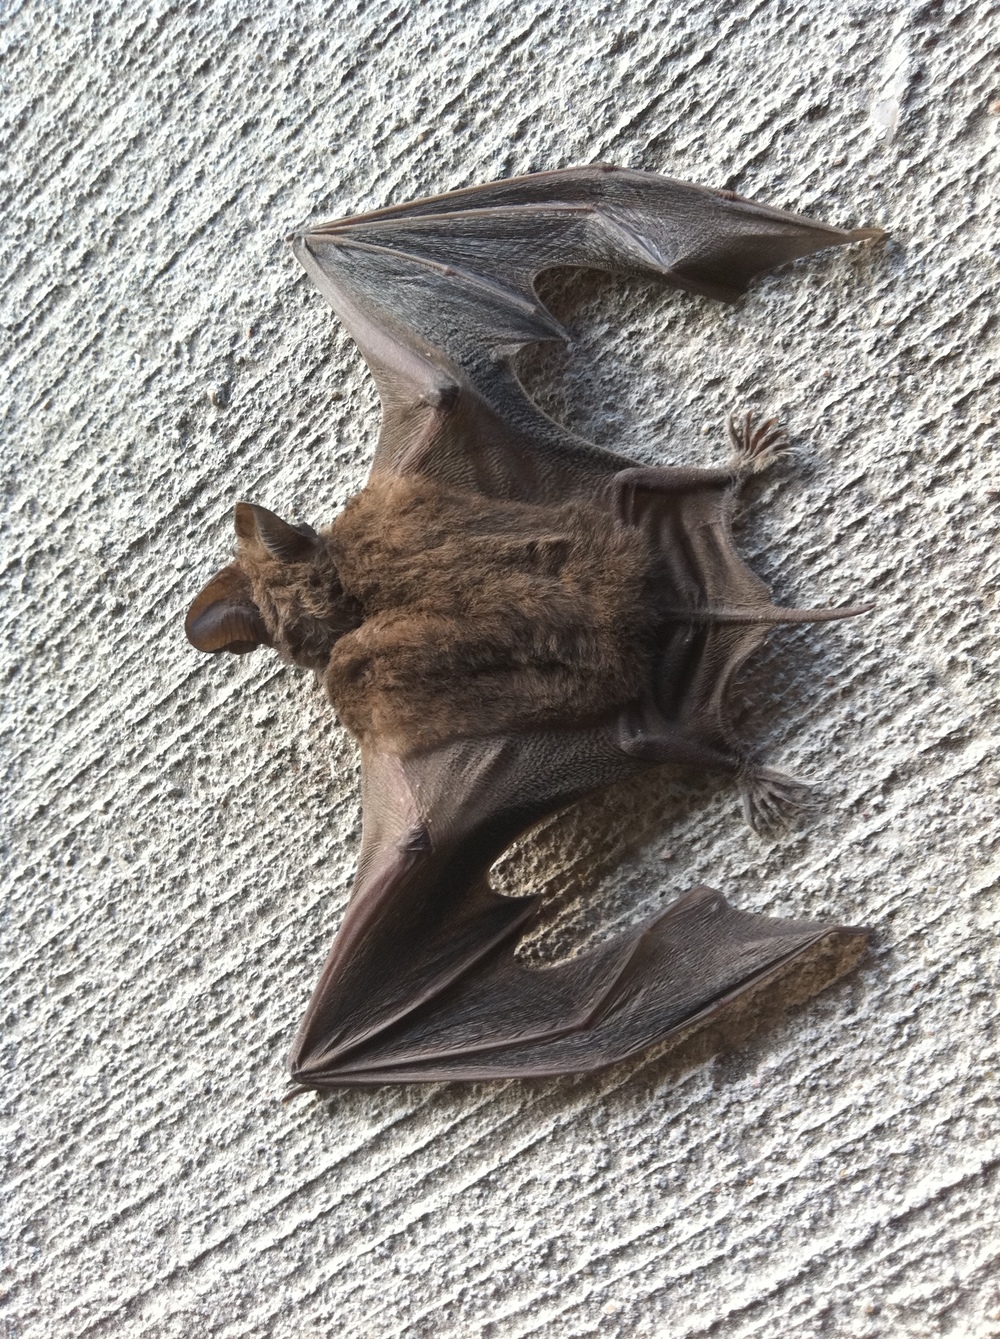 Downed bat trying to make it someplace safer...